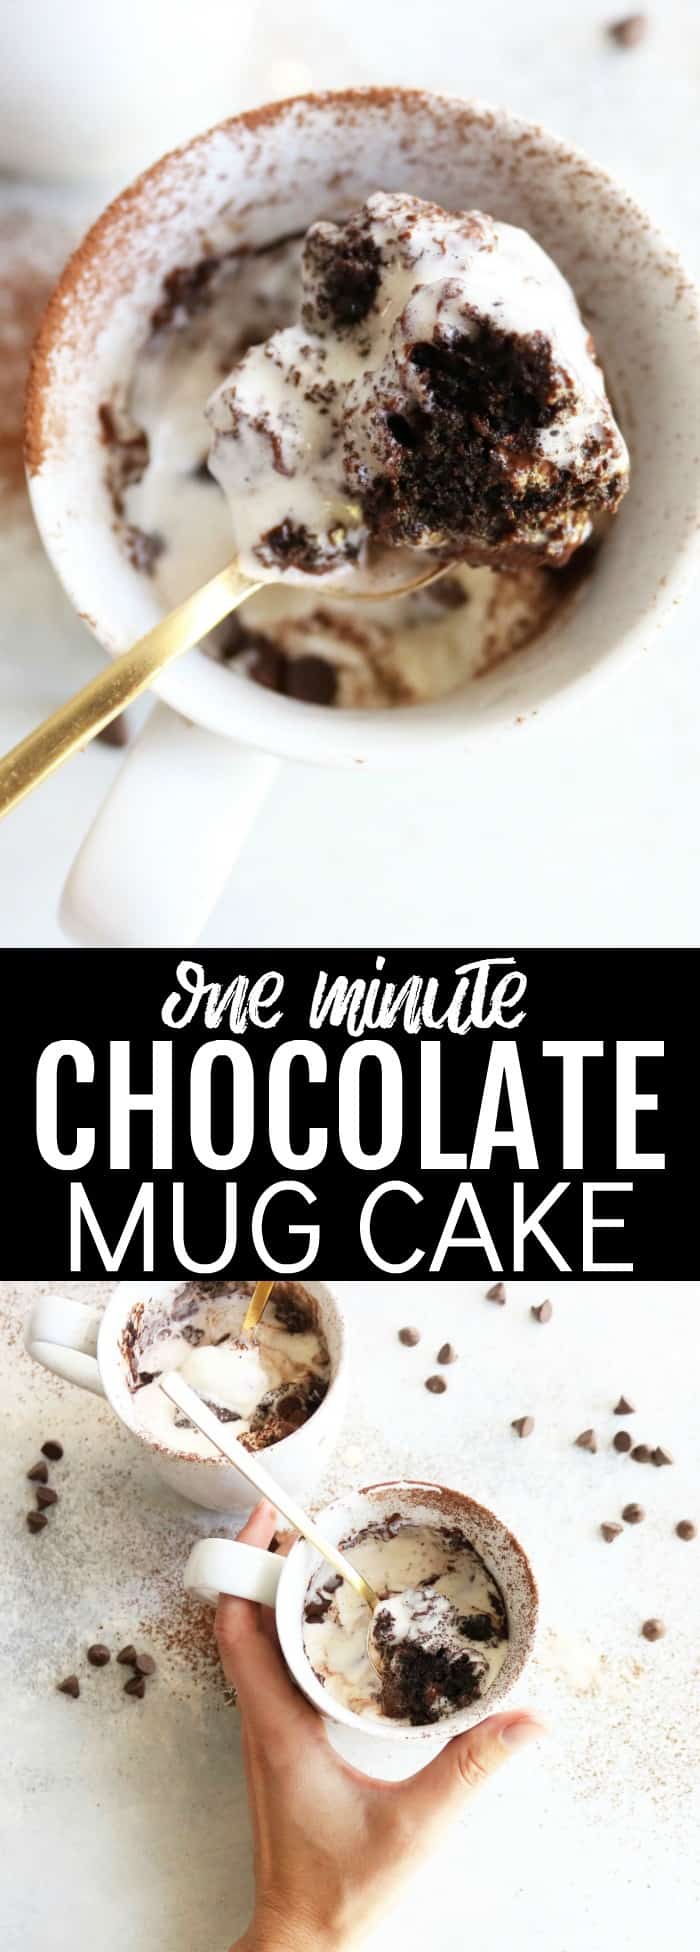 This recipe for One Minute Chocolate Mug Cake will be a staple in your house!! It's made with almond flour so it's gluten free! It's such a fun, delicious, and decadent dessert! thetoastedpinenut.com #glutenfree #dessert #recipe #mugcake